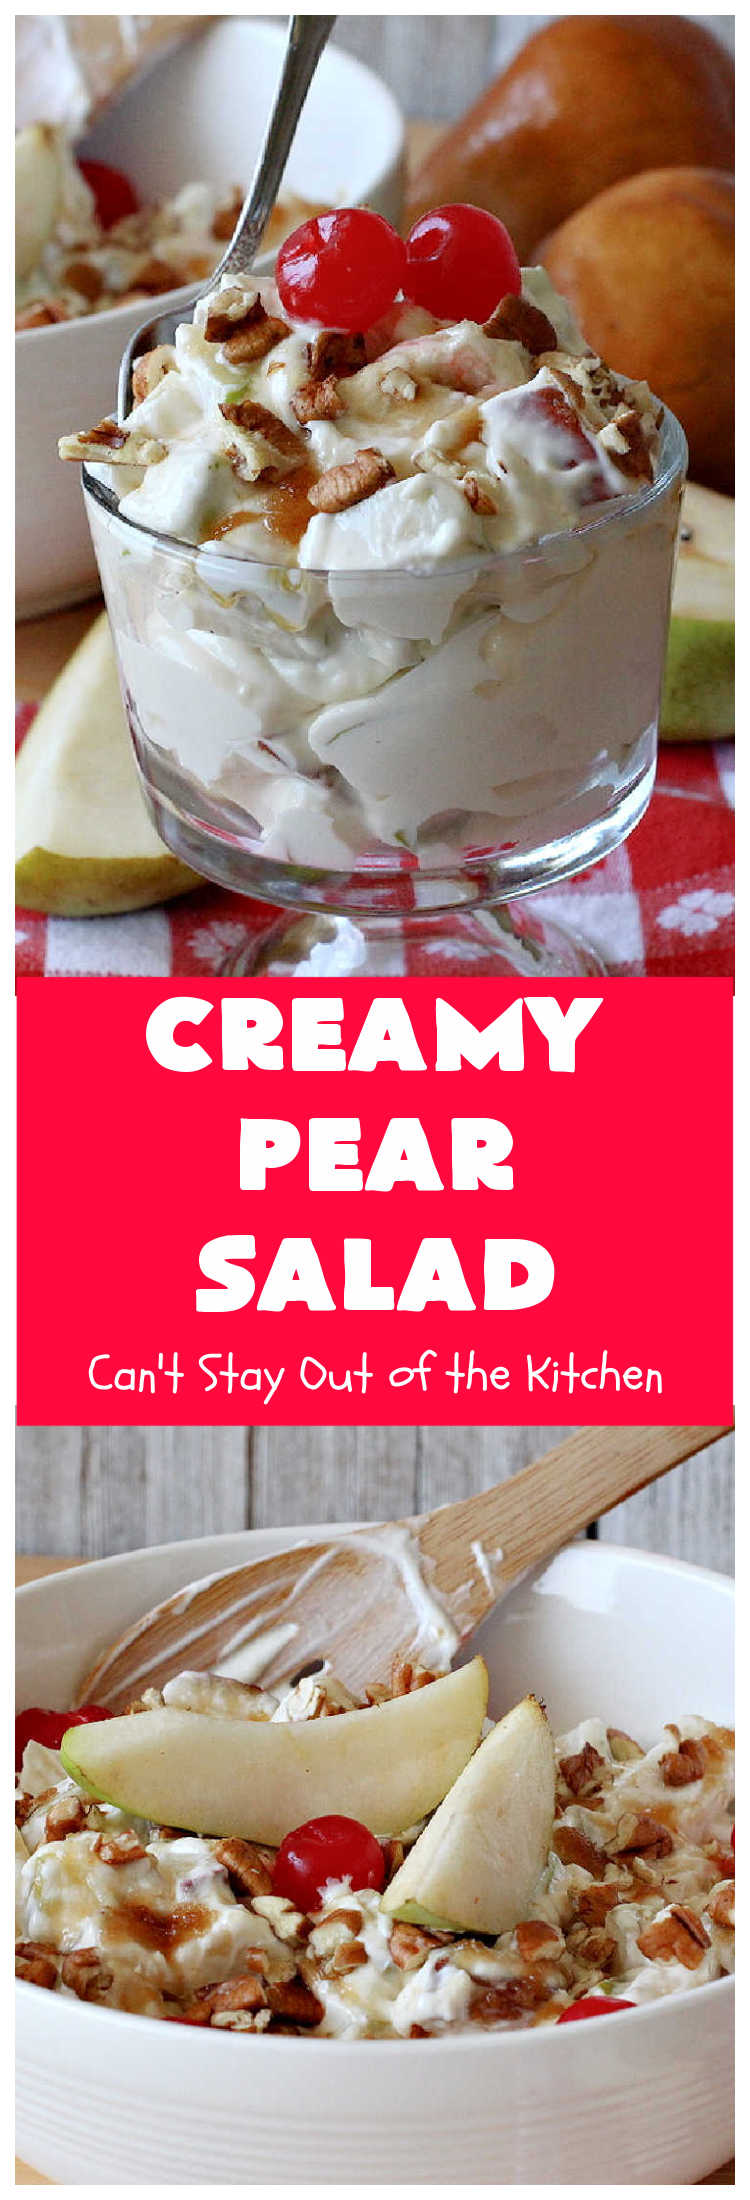 Creamy Pear Salad | Can't Stay Out of the Kitchen | this delectable #fruit #salad is so quick & easy to make up. It's terrific for company or #holiday dinners since it can be made in advance. #pears #CreamCheese #salad #CreamyPearSalad #FruitSalad